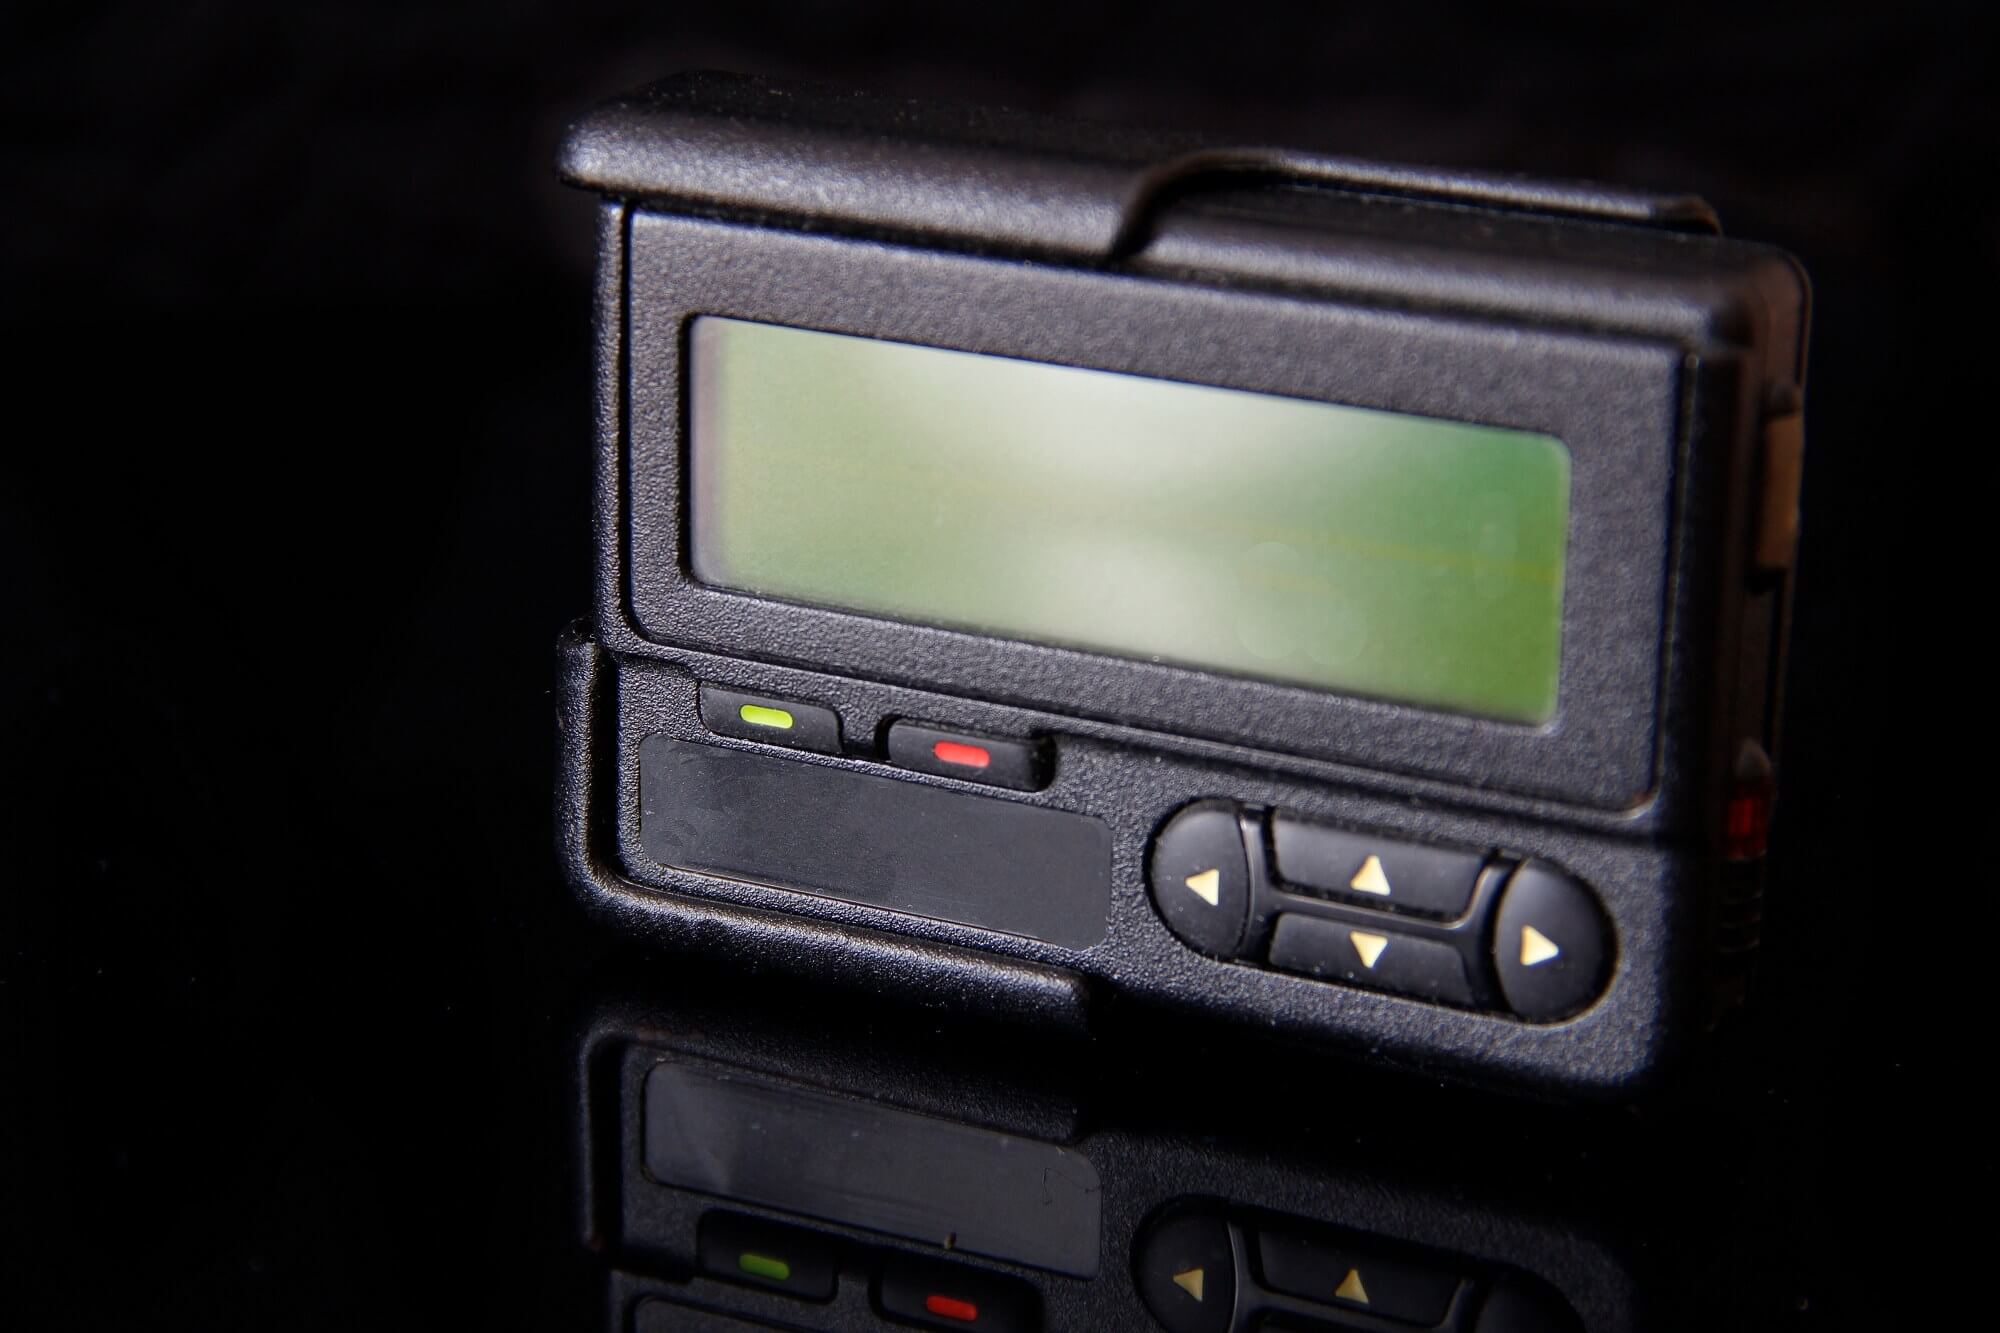 Japan's last pager service is closing down next year